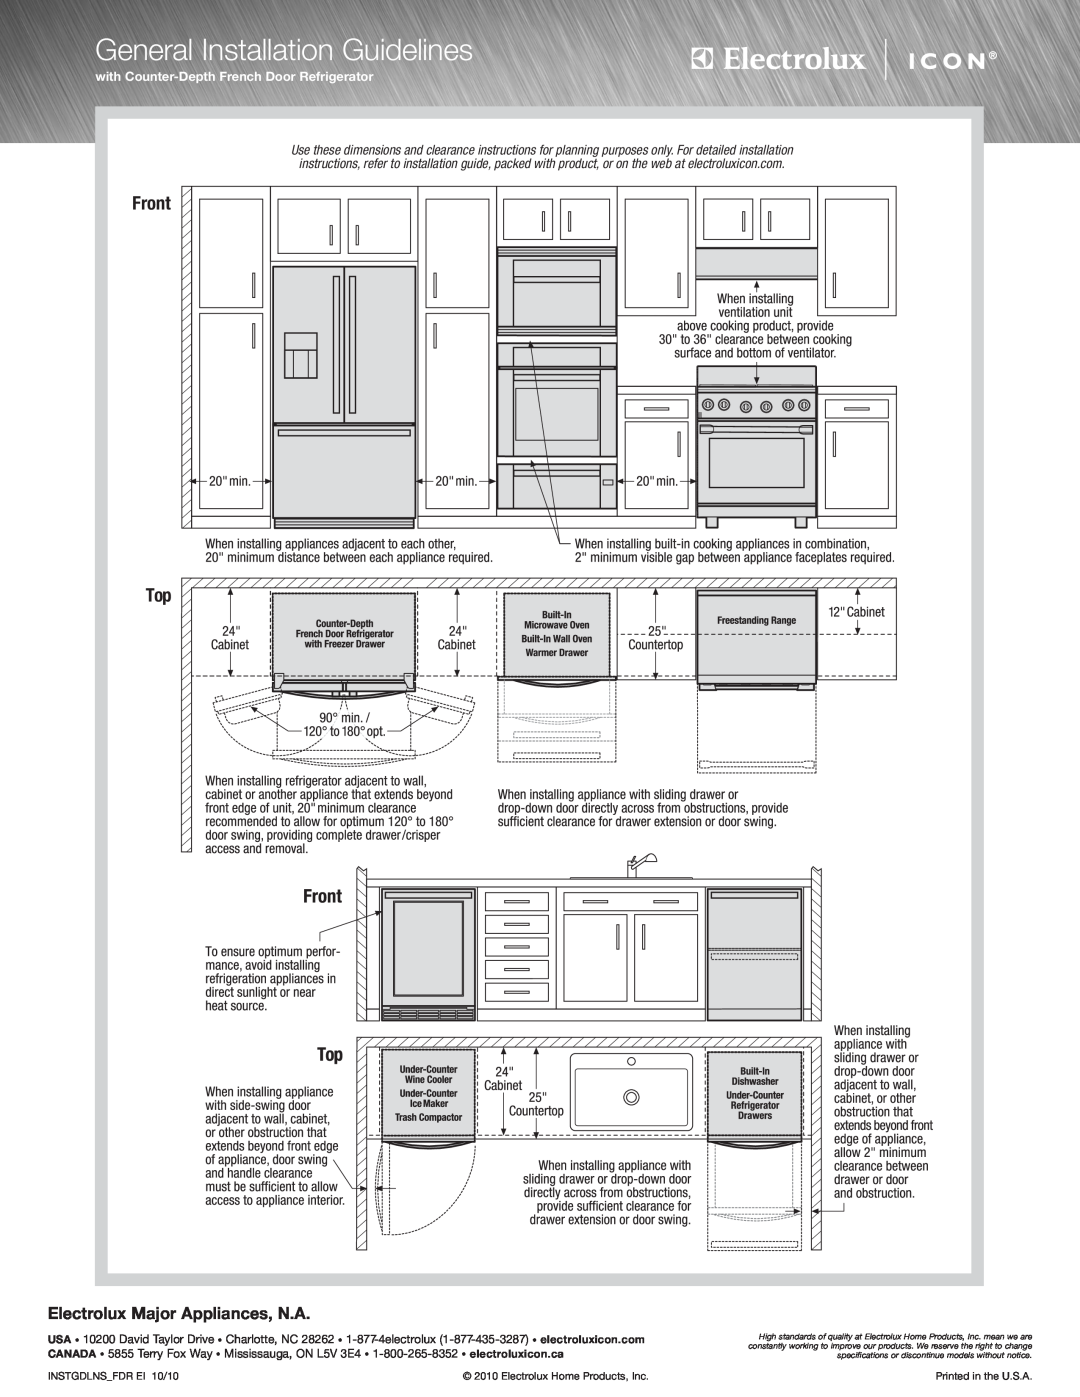 Electrolux E23BC68JPS specifications General Installation Guidelines, Electrolux Major Appliances, N.A, Front 